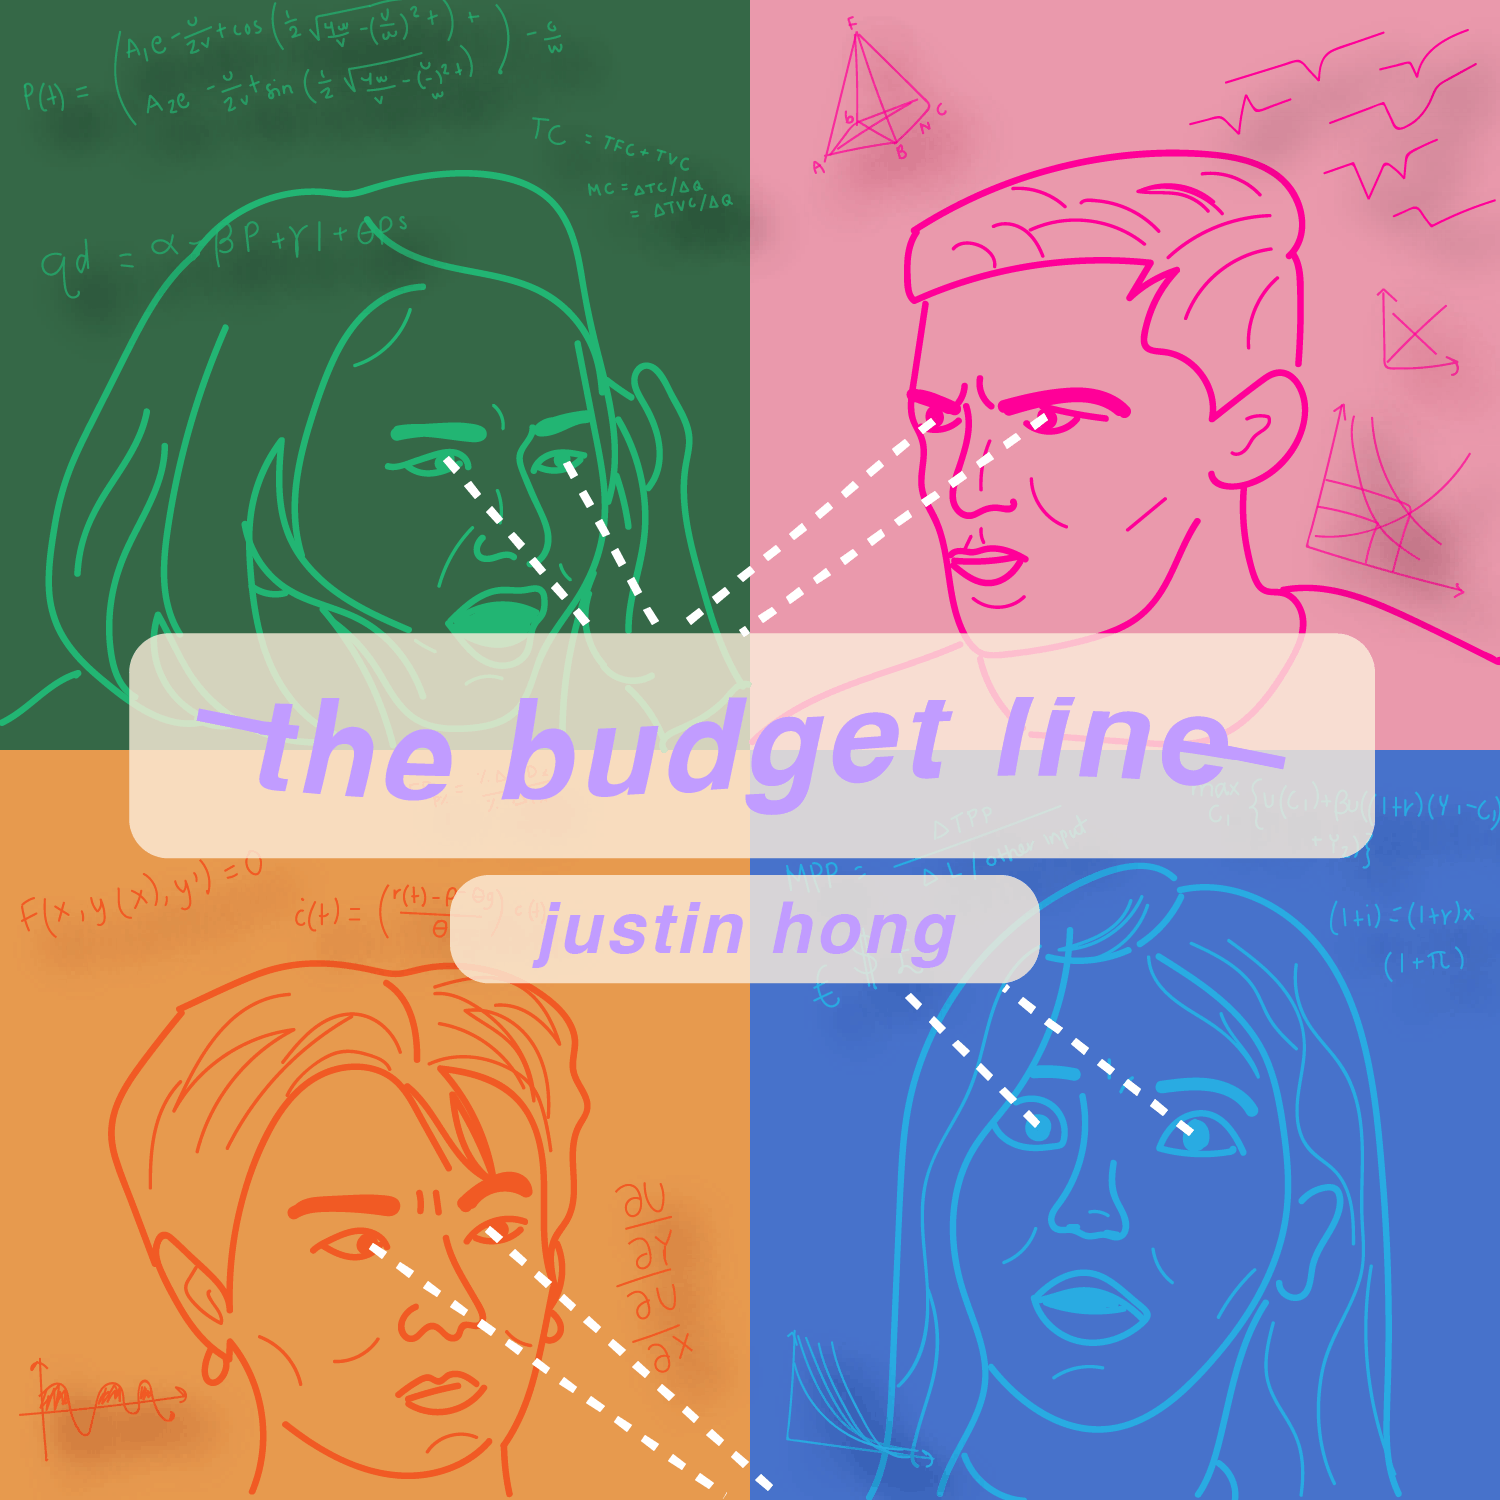 graphic for Justin Hong's column "the budget line"